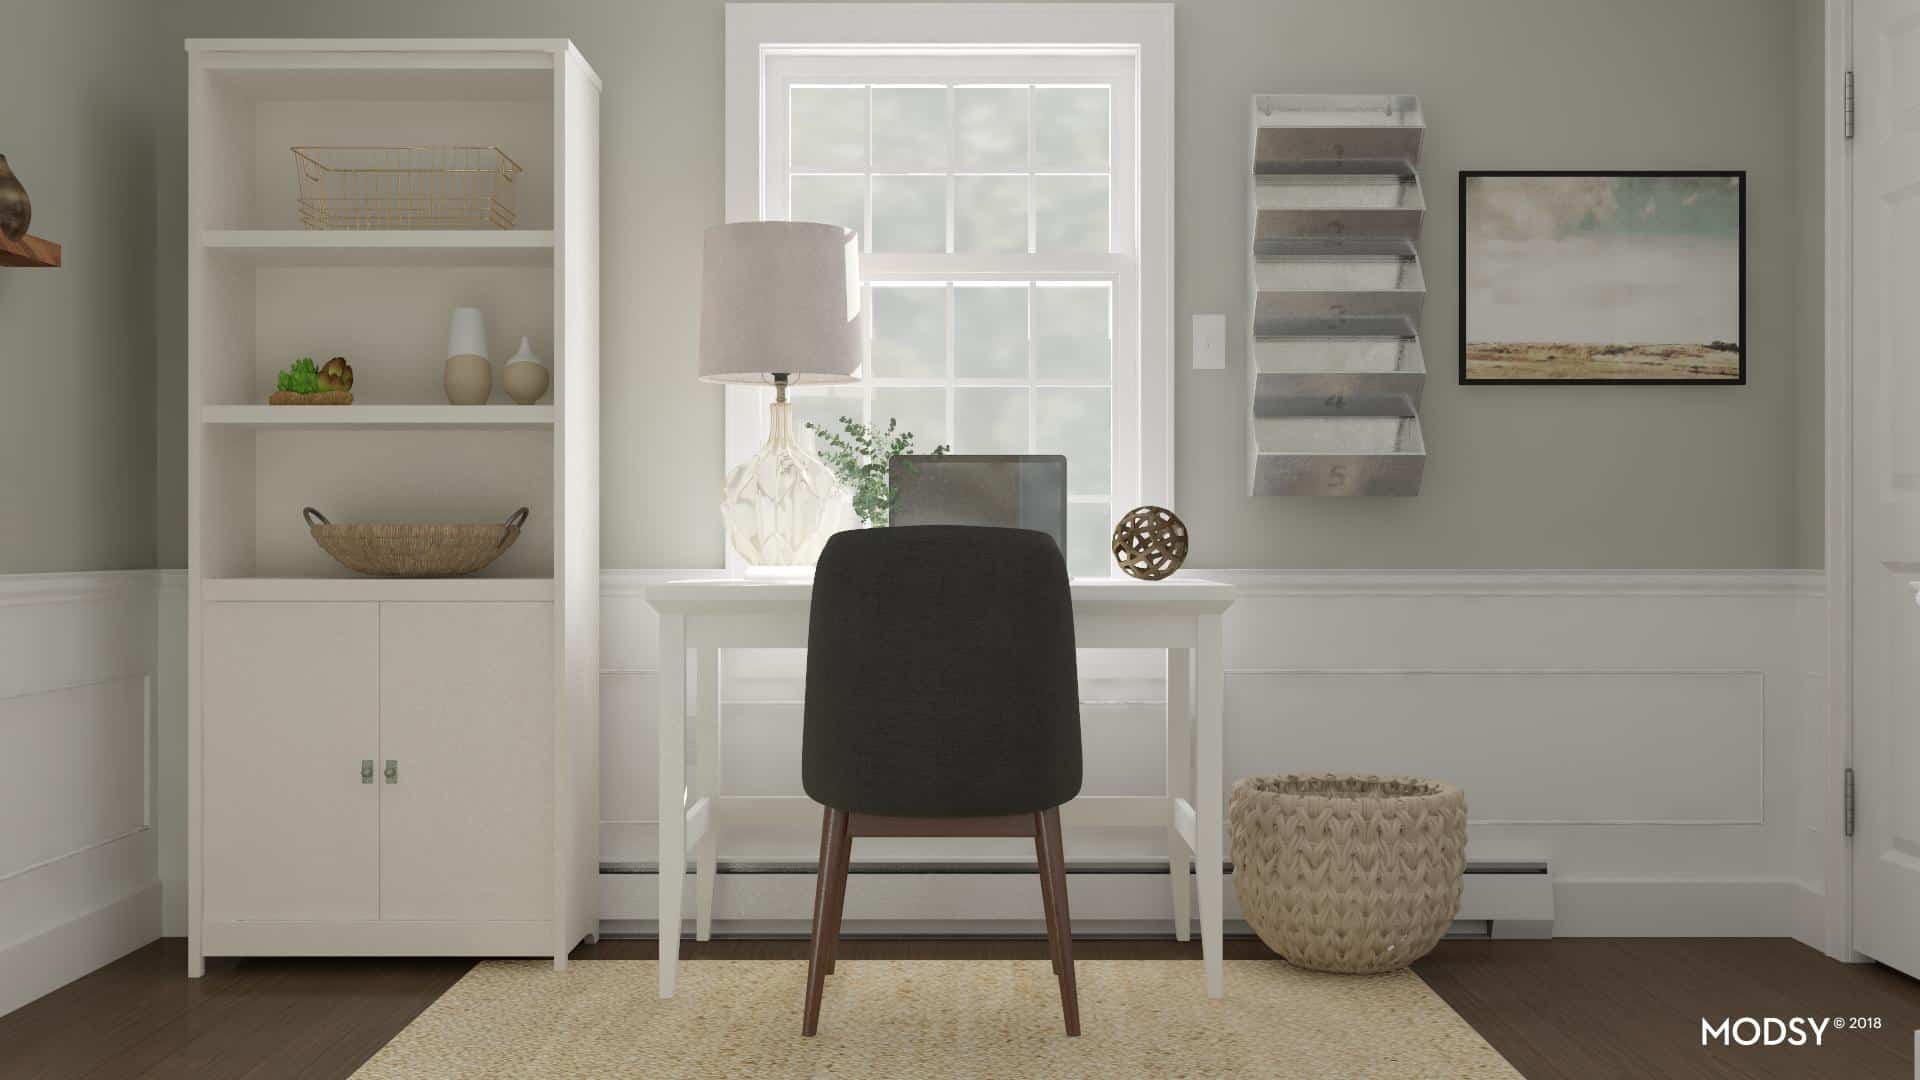 A simulated view of a desk and chair, facing a window, with a shelf to the left and a filing system mounted to the wall on the right